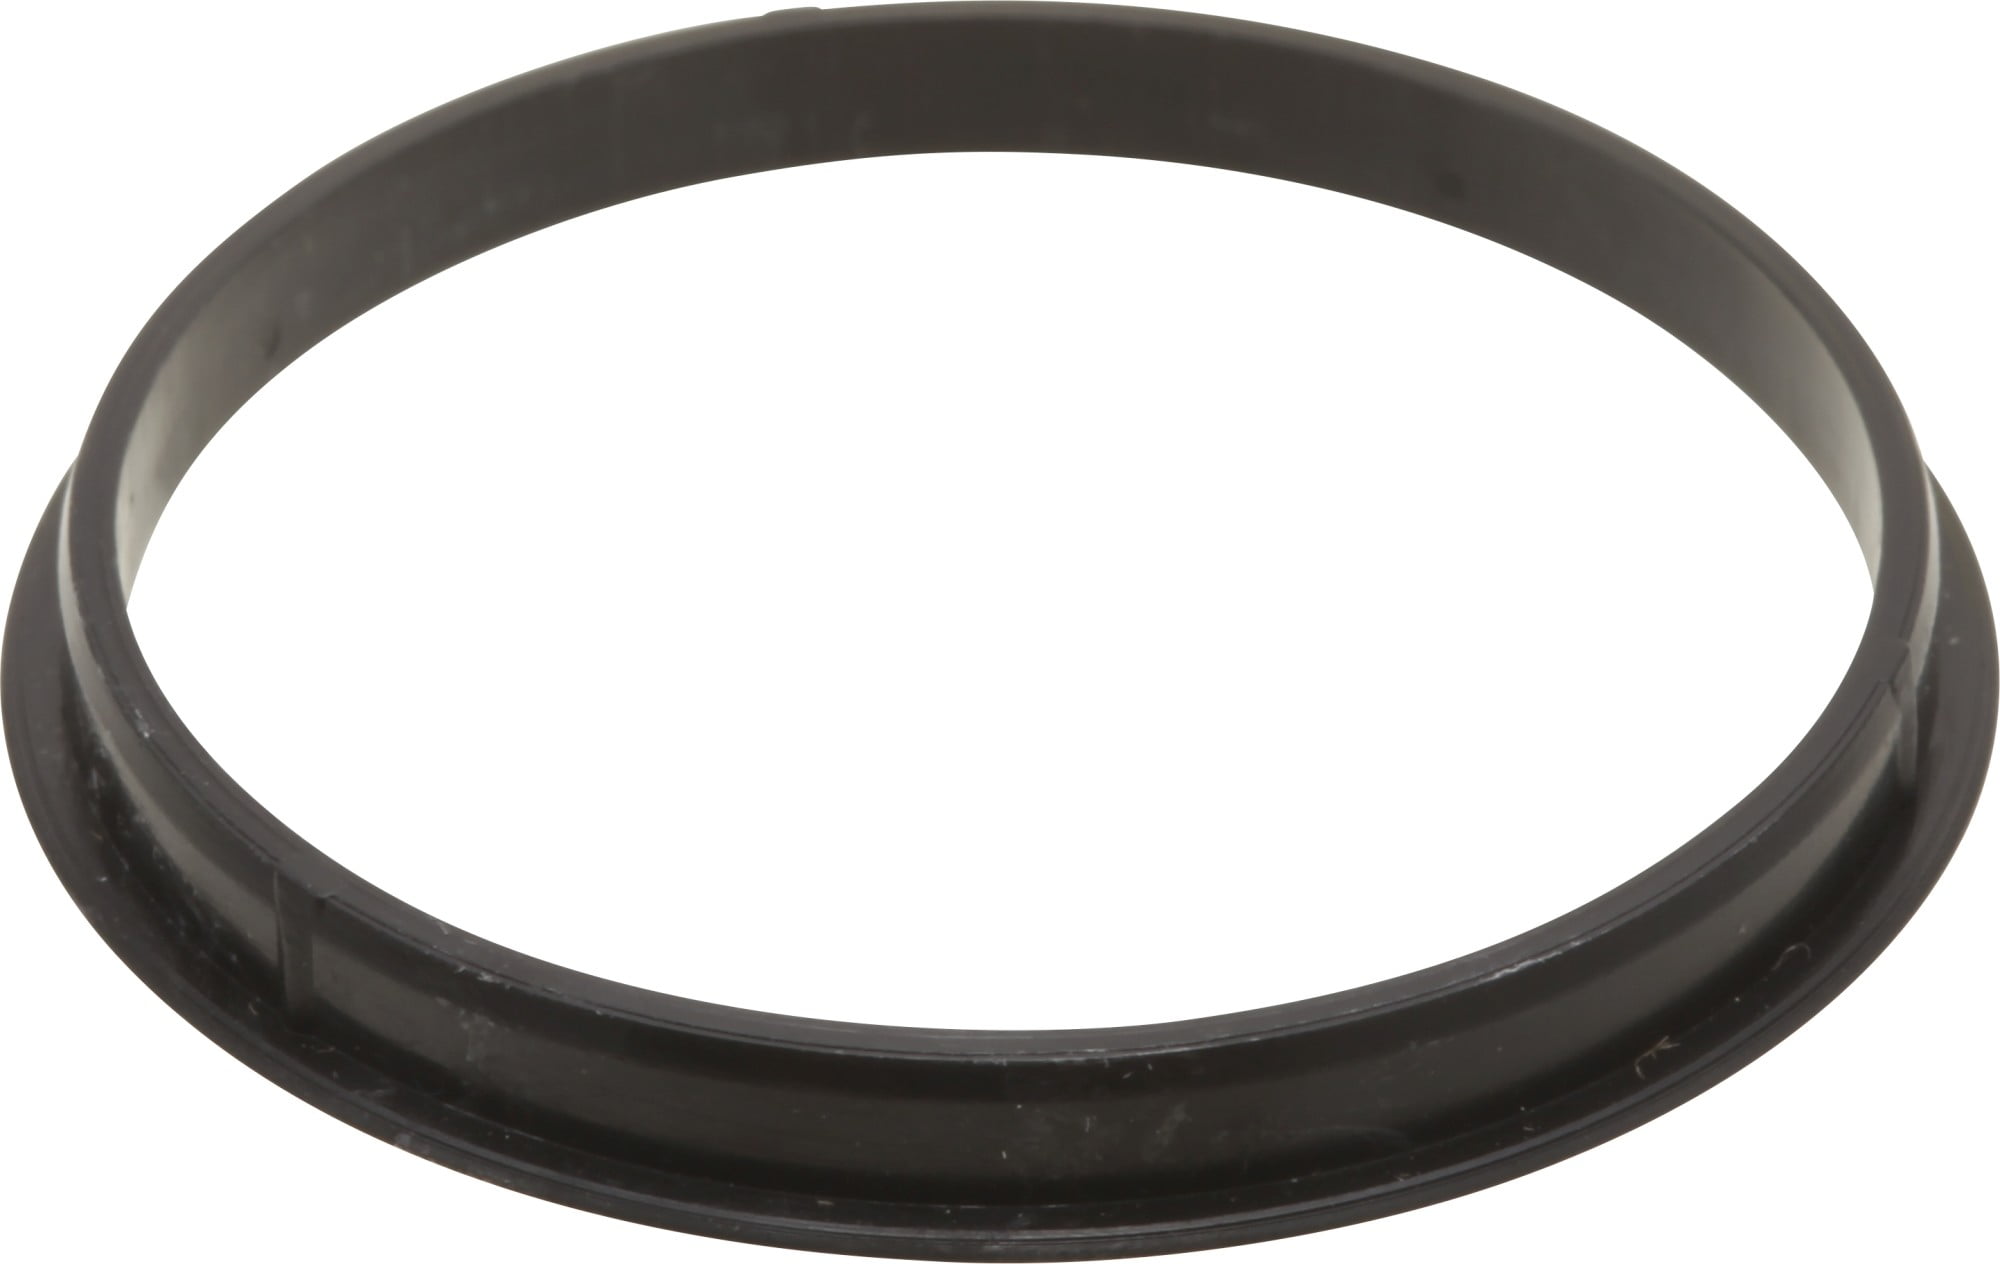 Rp41896 Glide Ring - Small For Faucets